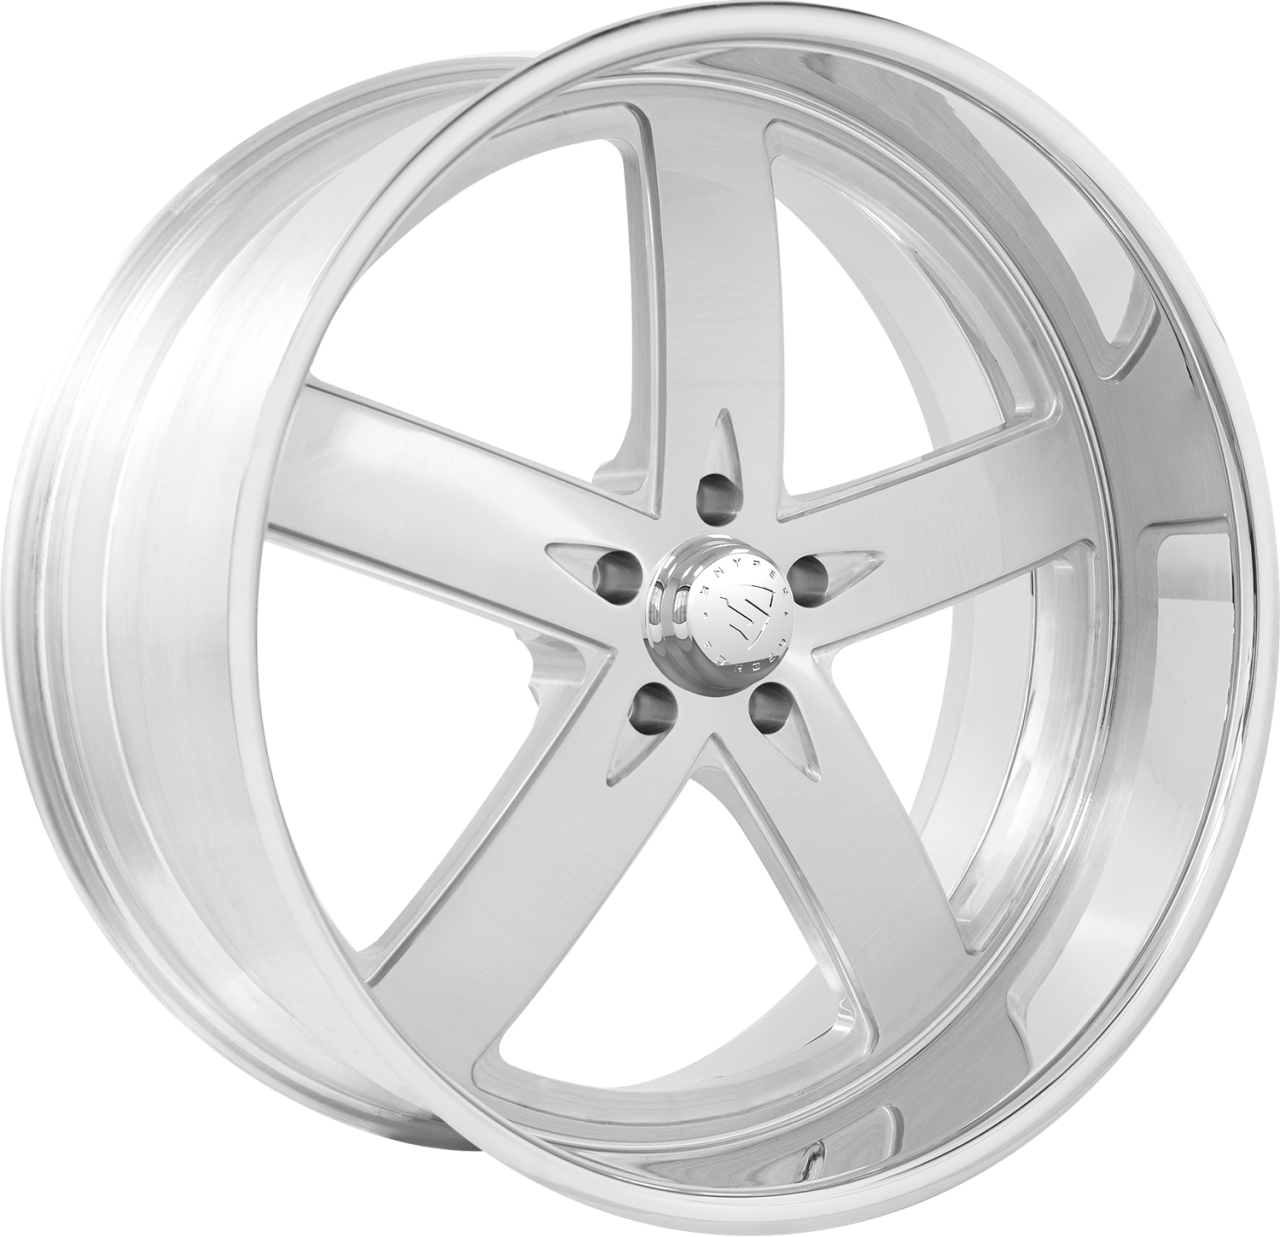 Snyper Forged Booya Polished Finish wheel with Booya Polished Finish finish